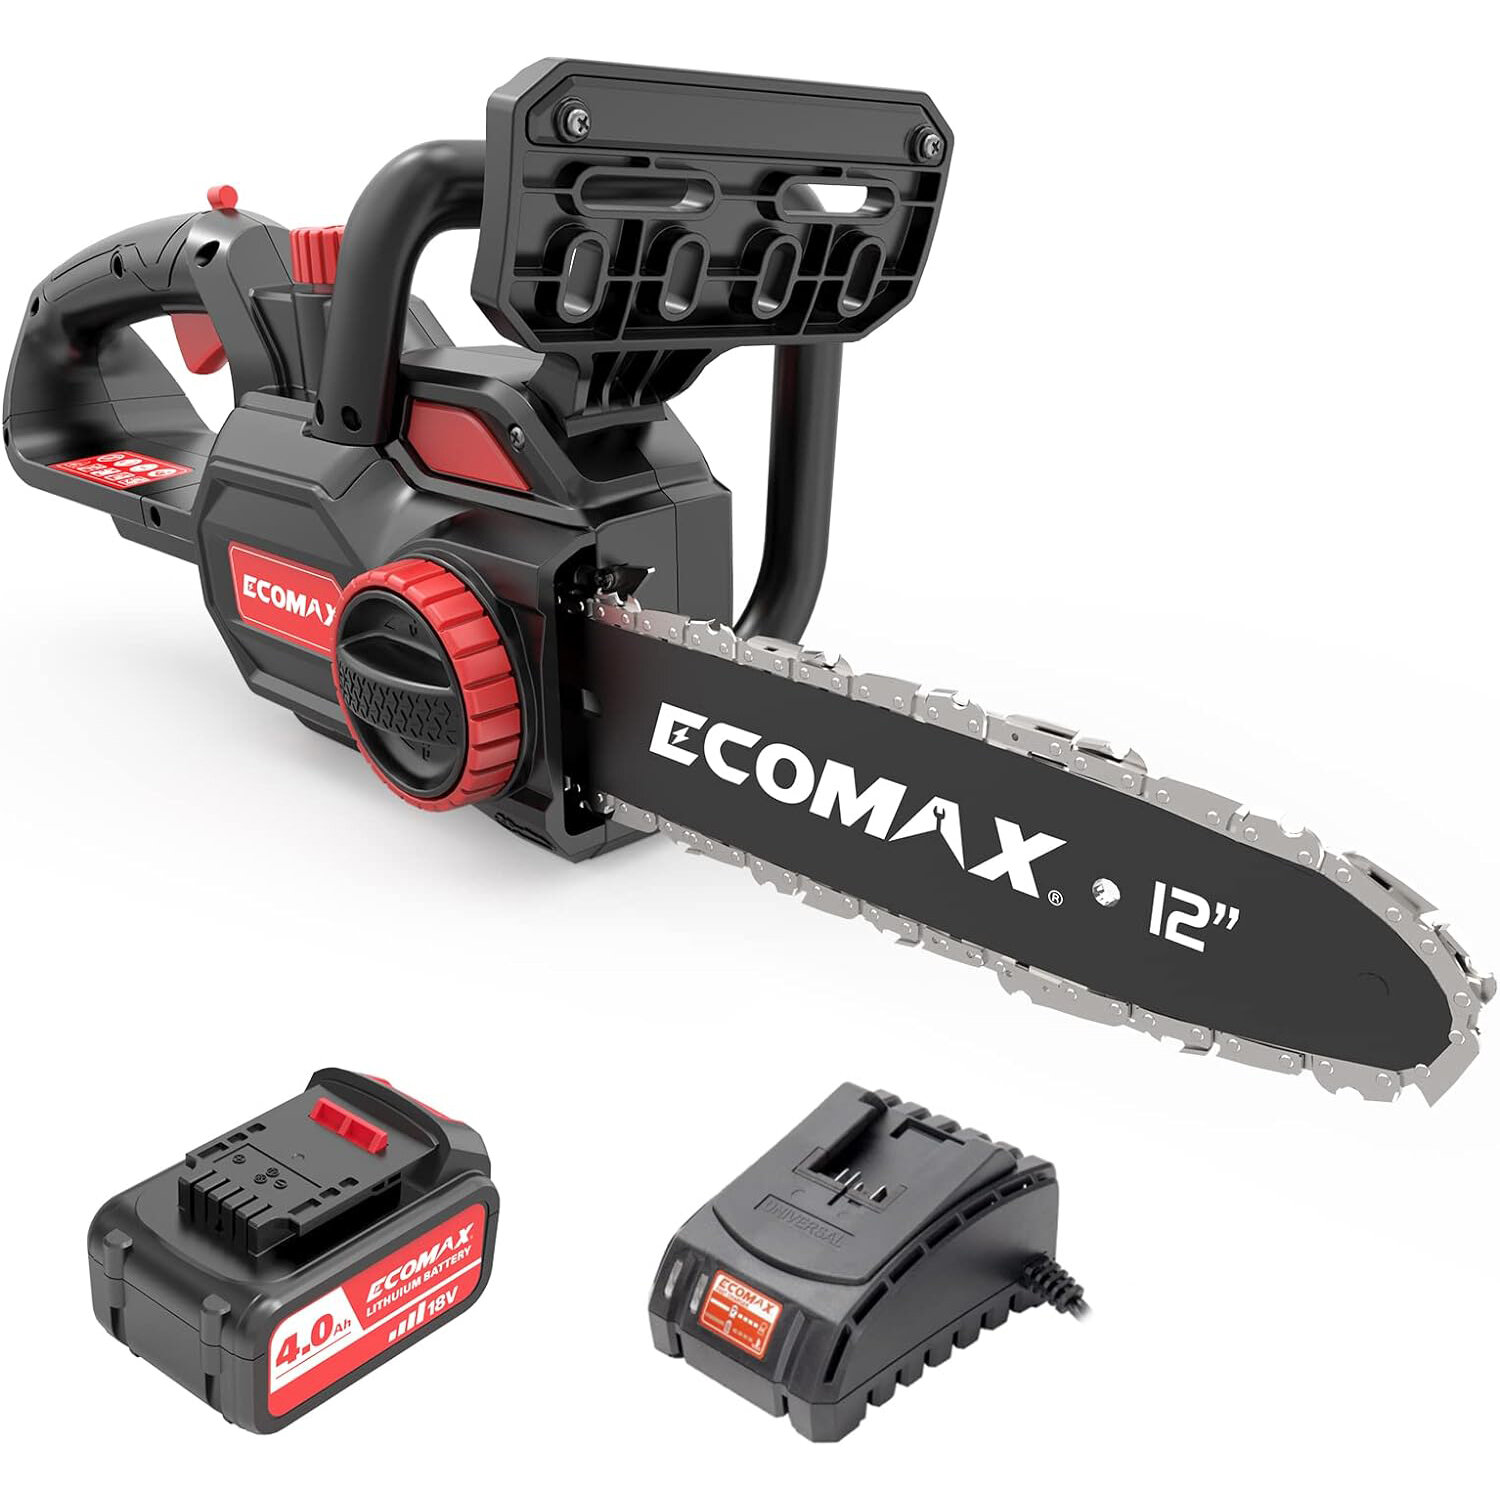 

[USA Direct]Ecomax ELG05 Cordless Chainsaw 12-Inch 18V Electric Chainsaw with 4Ah Battery & Fast Charger Powerful Chain